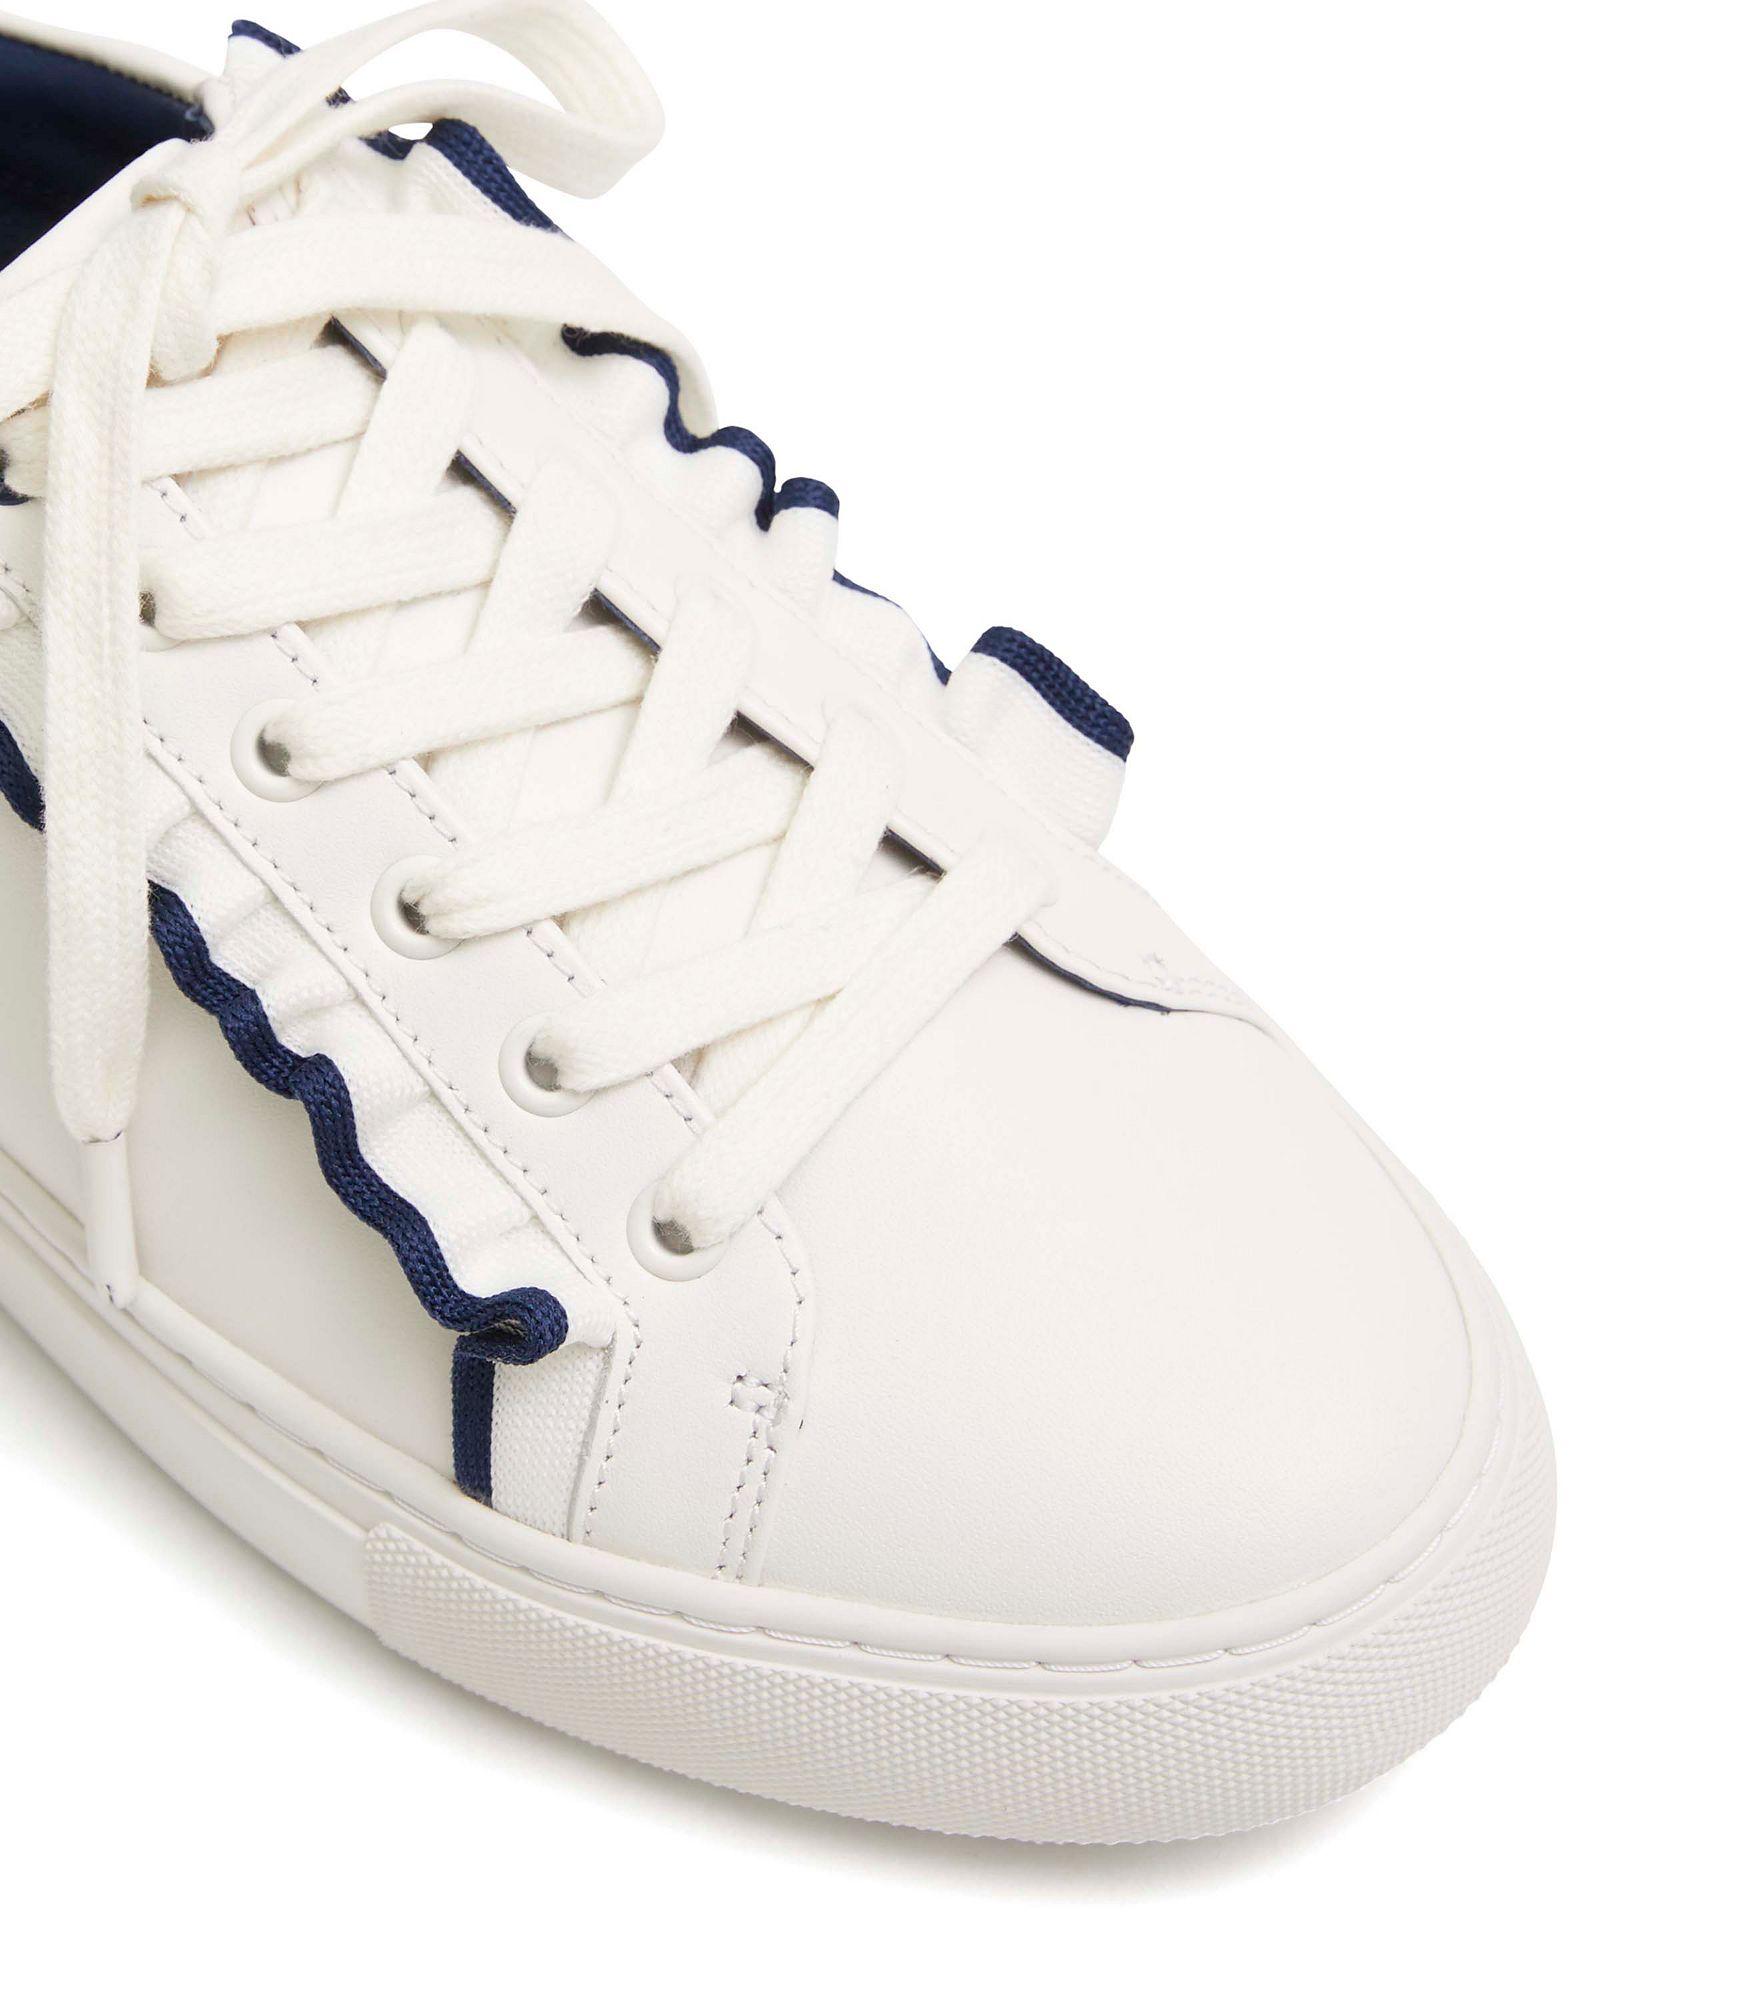 Tory Sport Leather Golf Ruffle Sneakers in White - Lyst